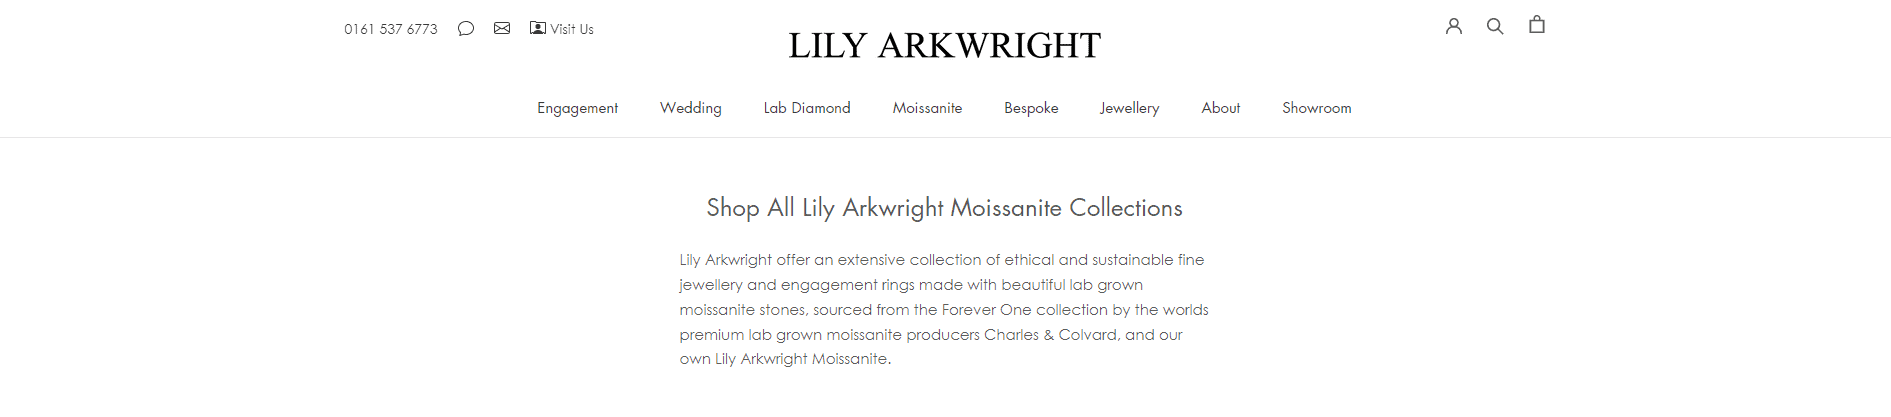 lily arkwright home page